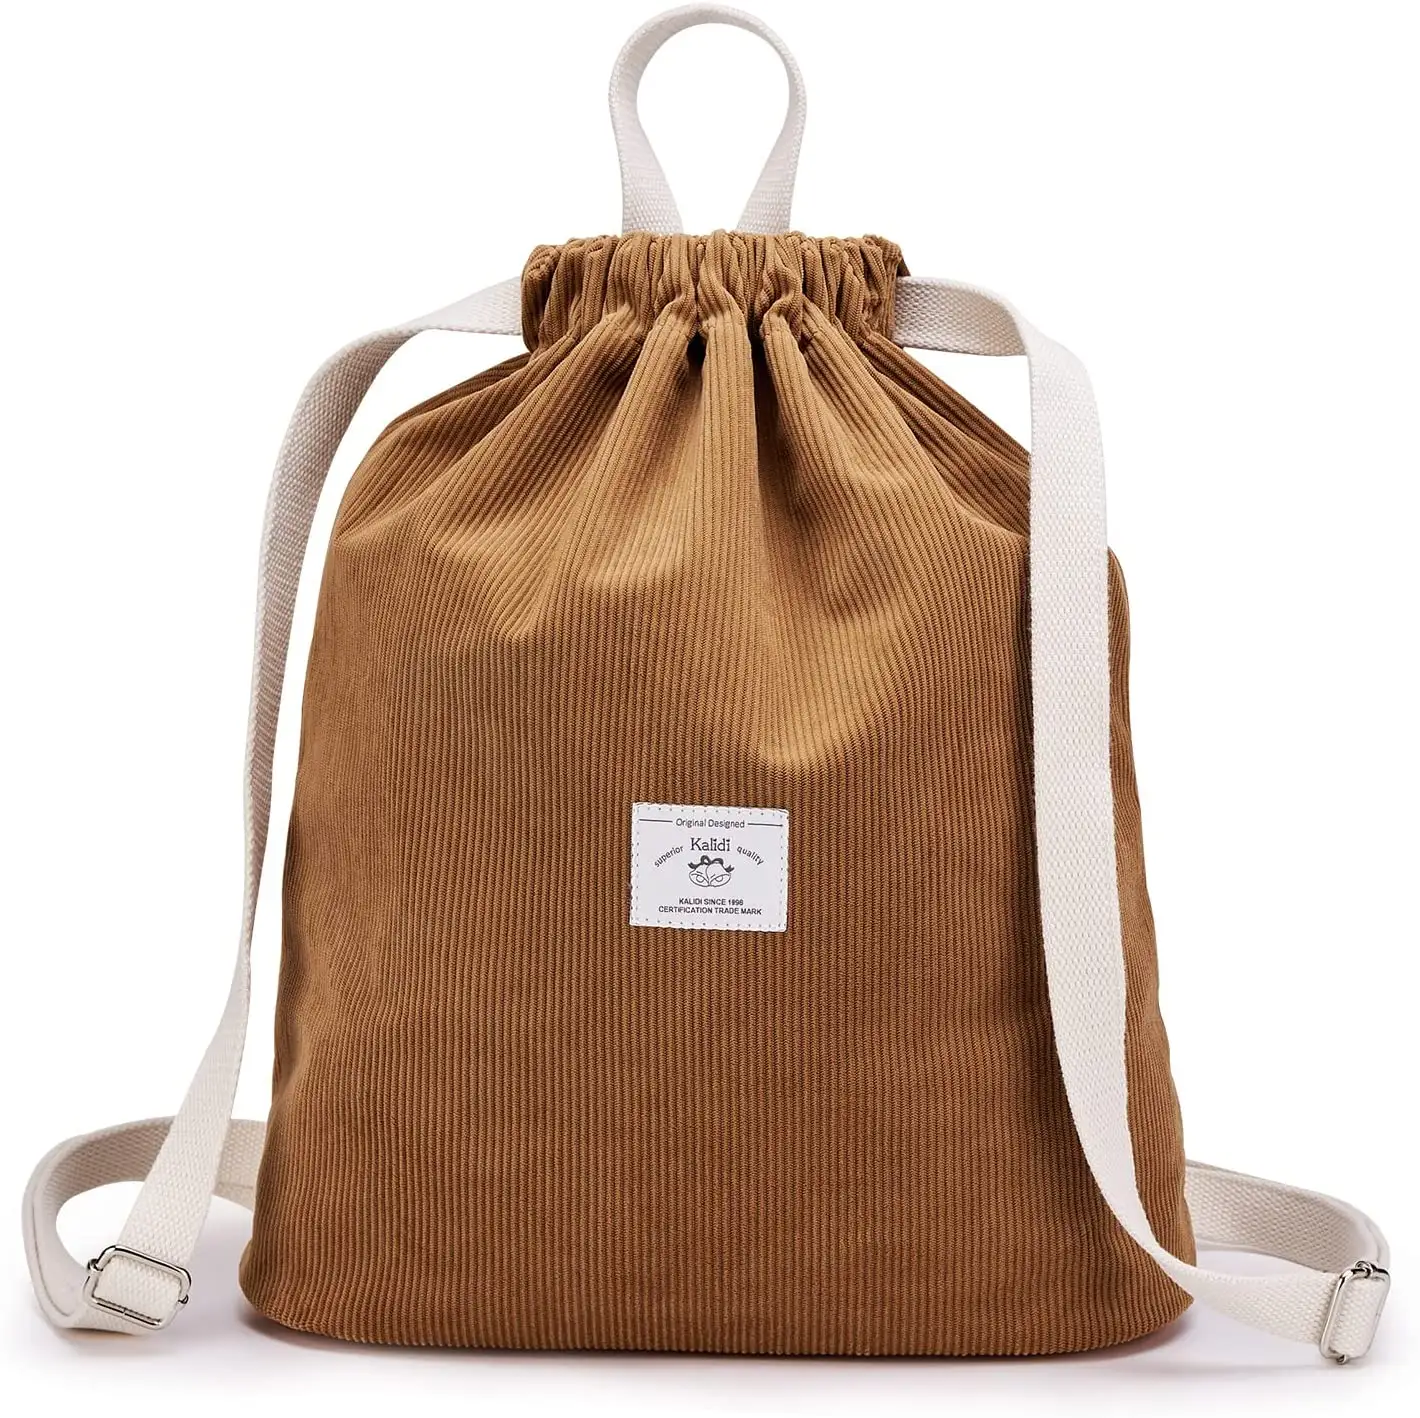 Low MOQ Customized Gift Corduroy Cloth Drawstring Backpack Cotton Canvas Bag With Logo